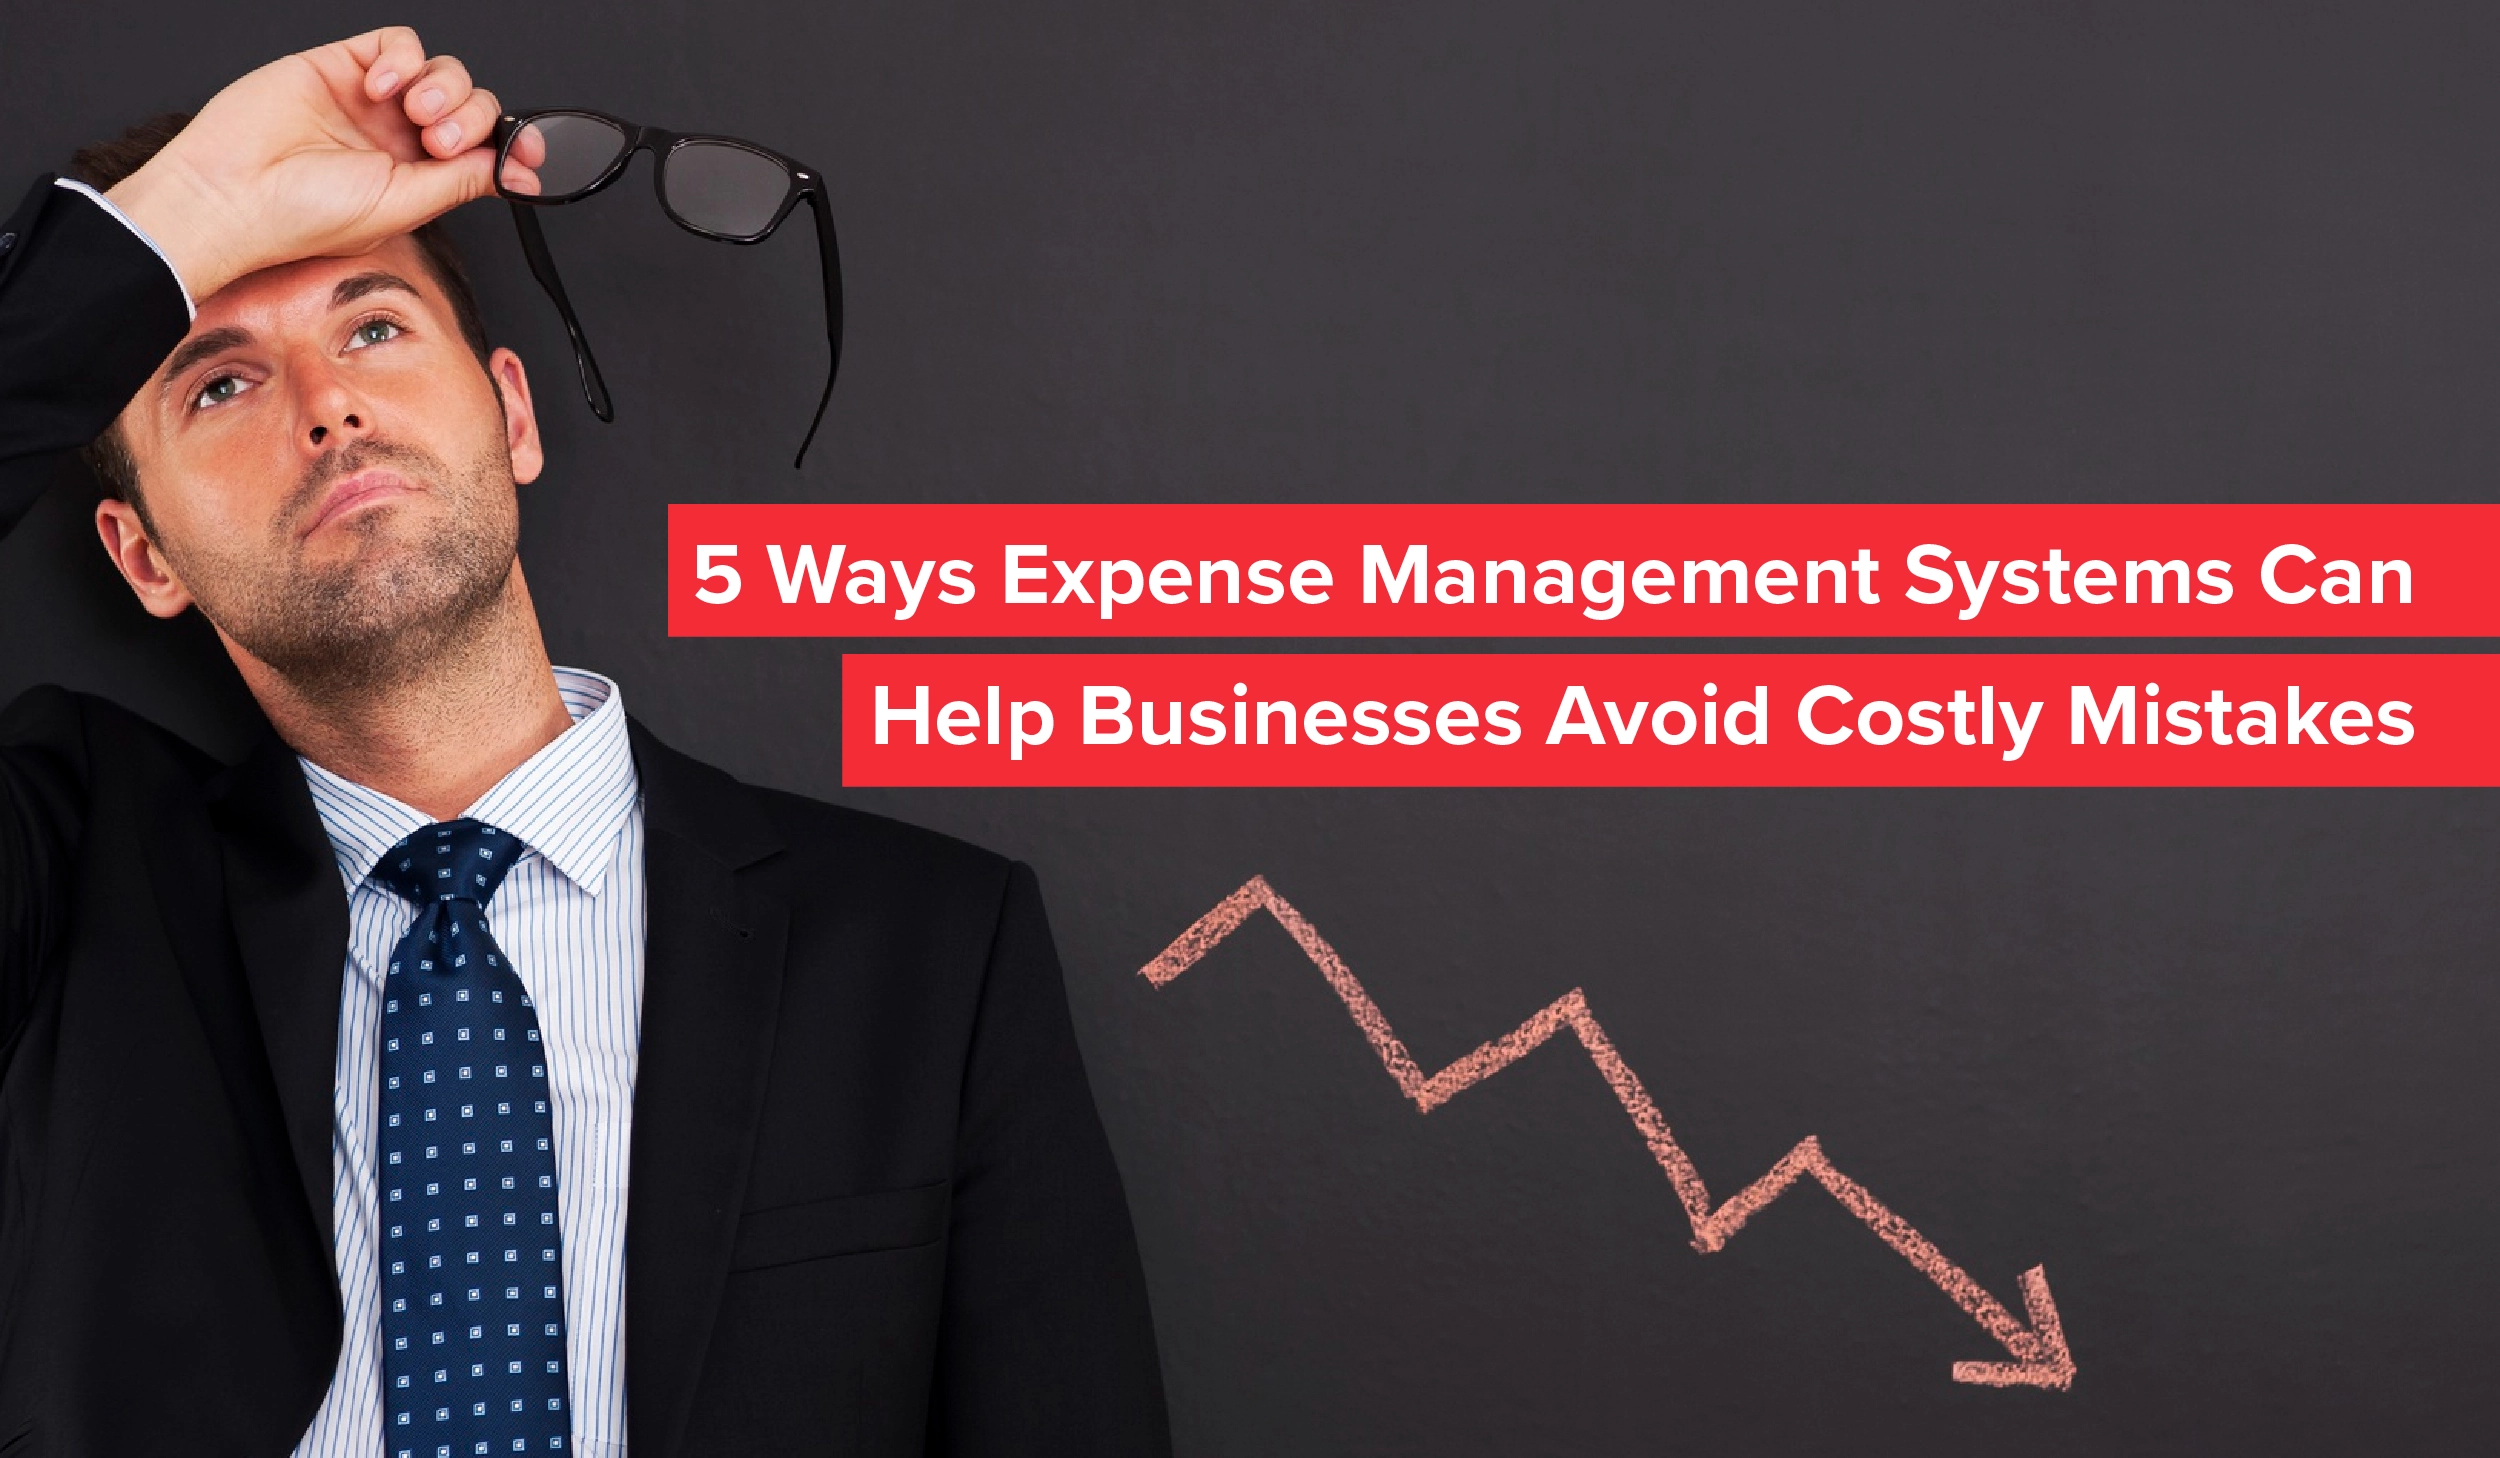 5 Ways Expense Management Systems Can Help Businesses Avoid Costly Mistakes